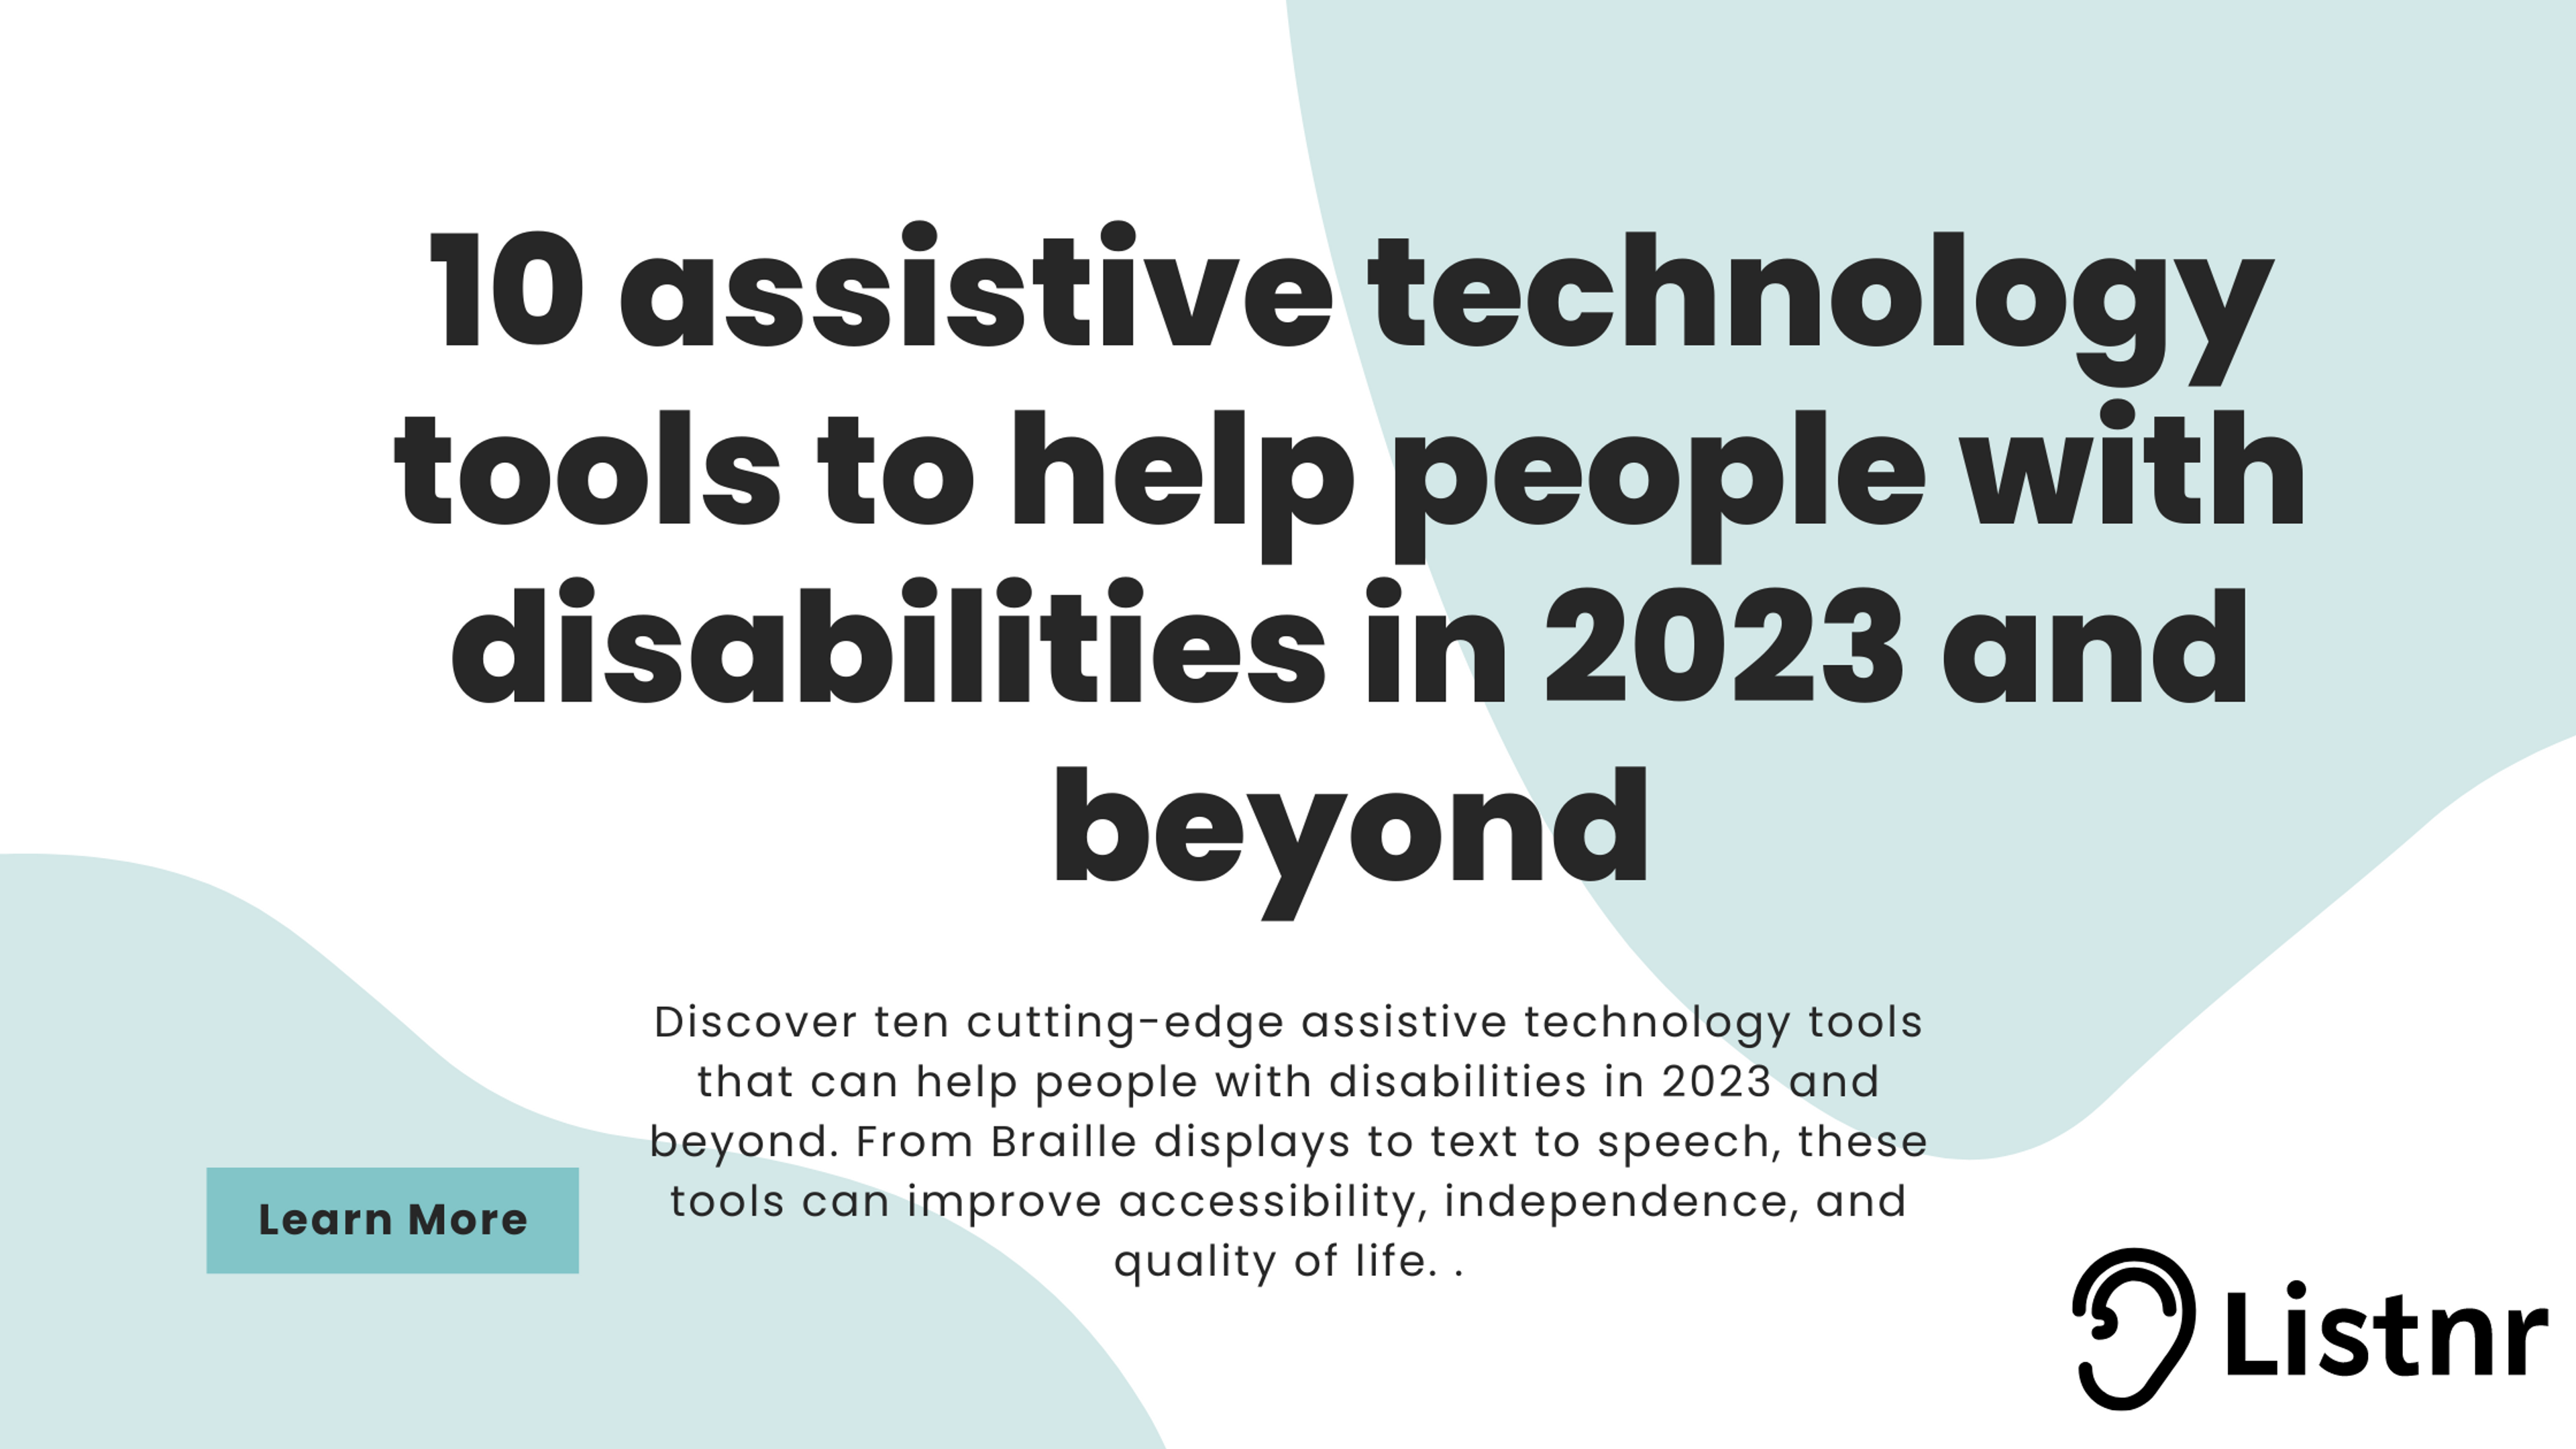 10 assistive technology tools to help people with disabilities in 2023 and beyond